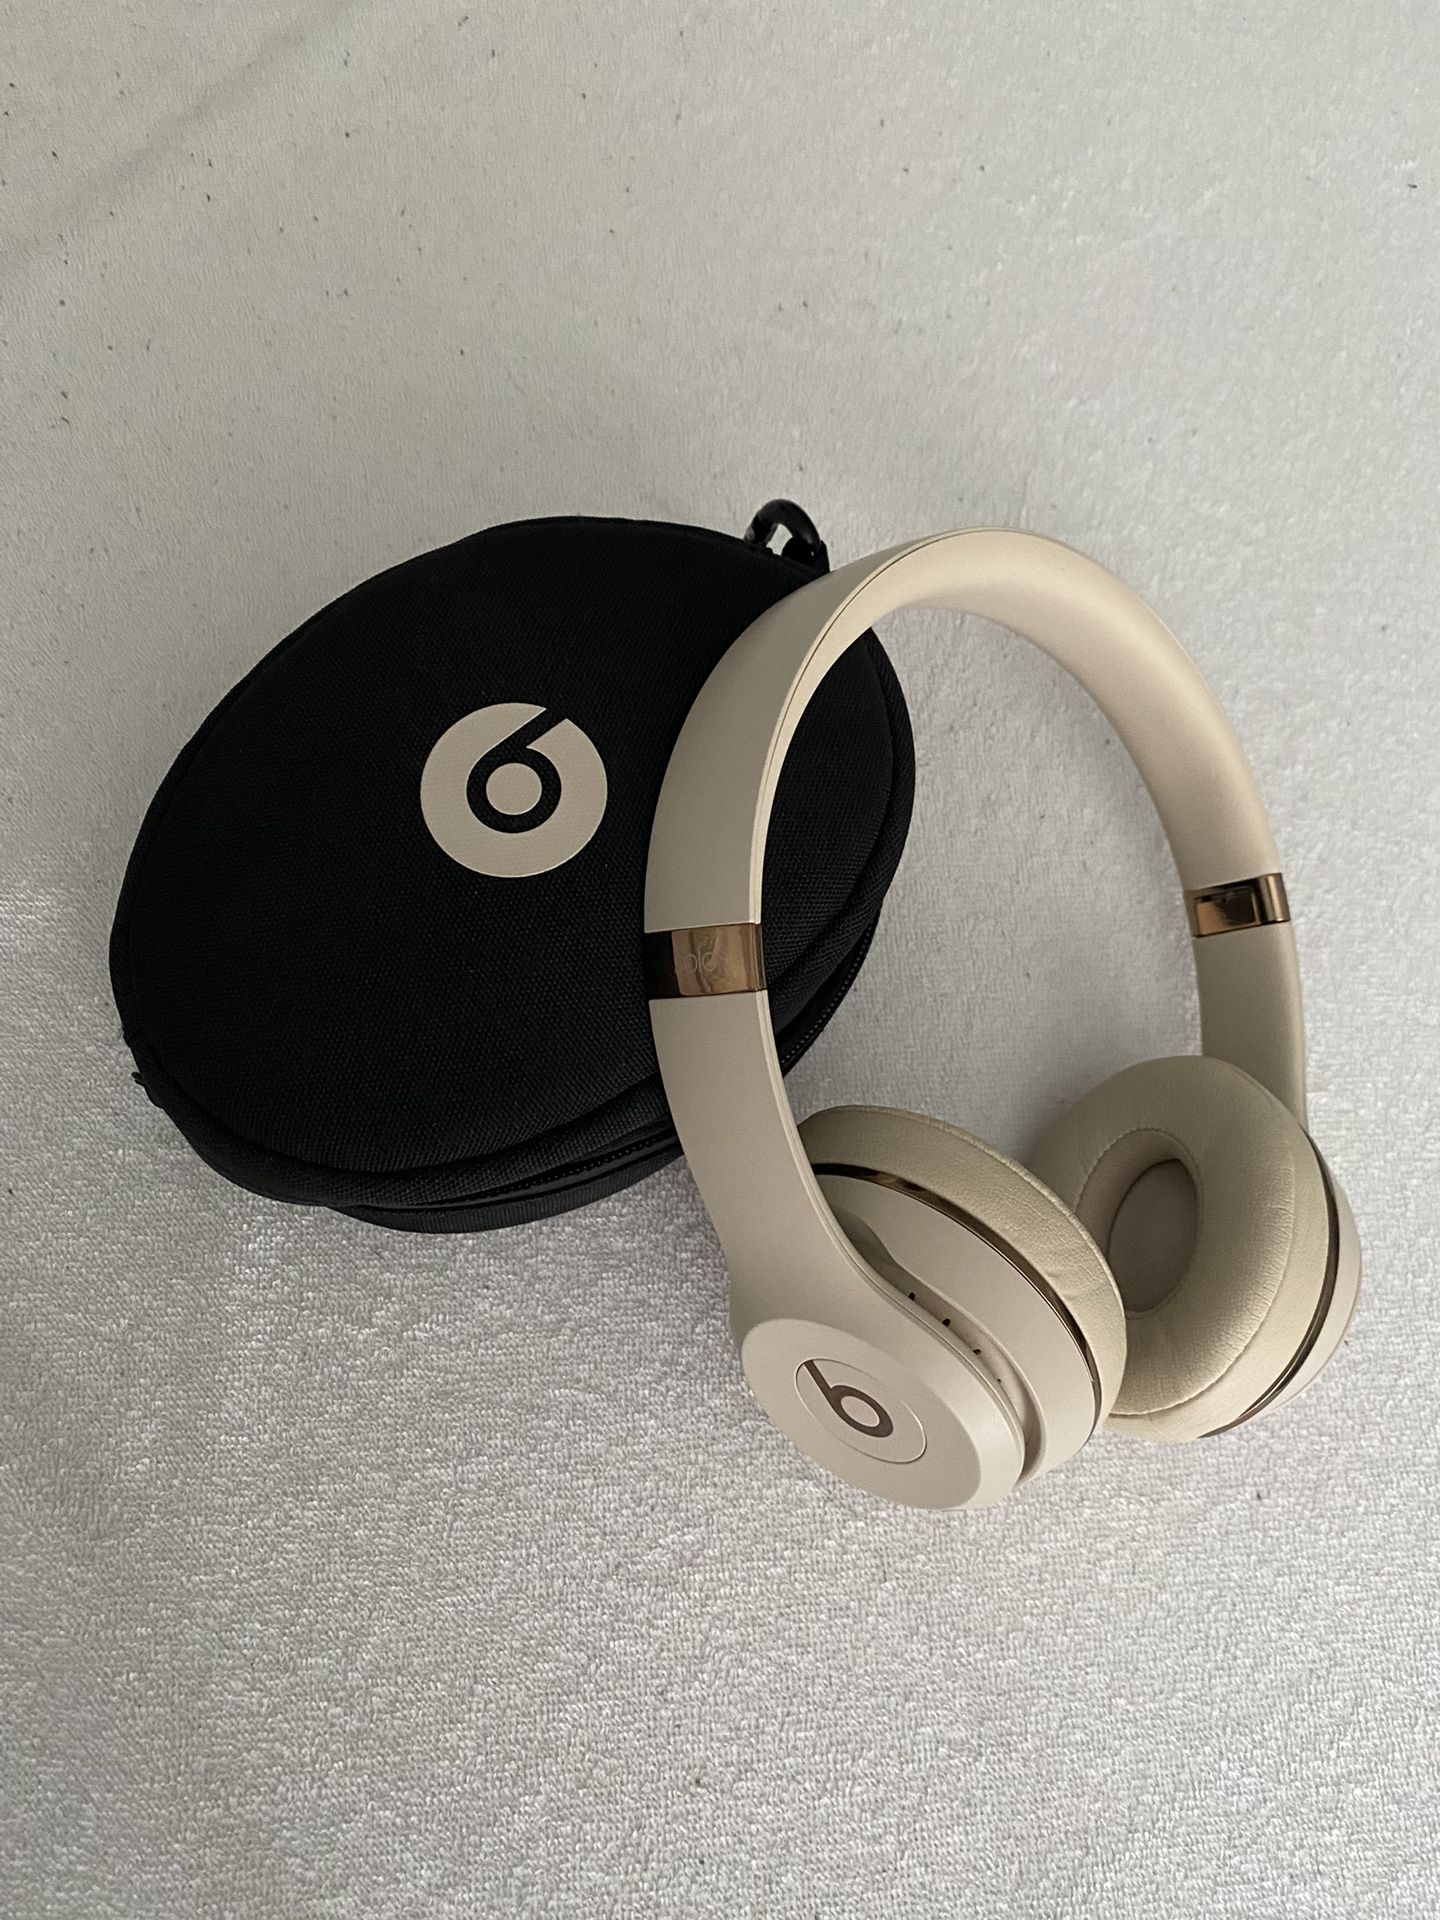 LIMITED EDITION!!! Beats by Dr. Dre Solo3 Wireless - BEIGE